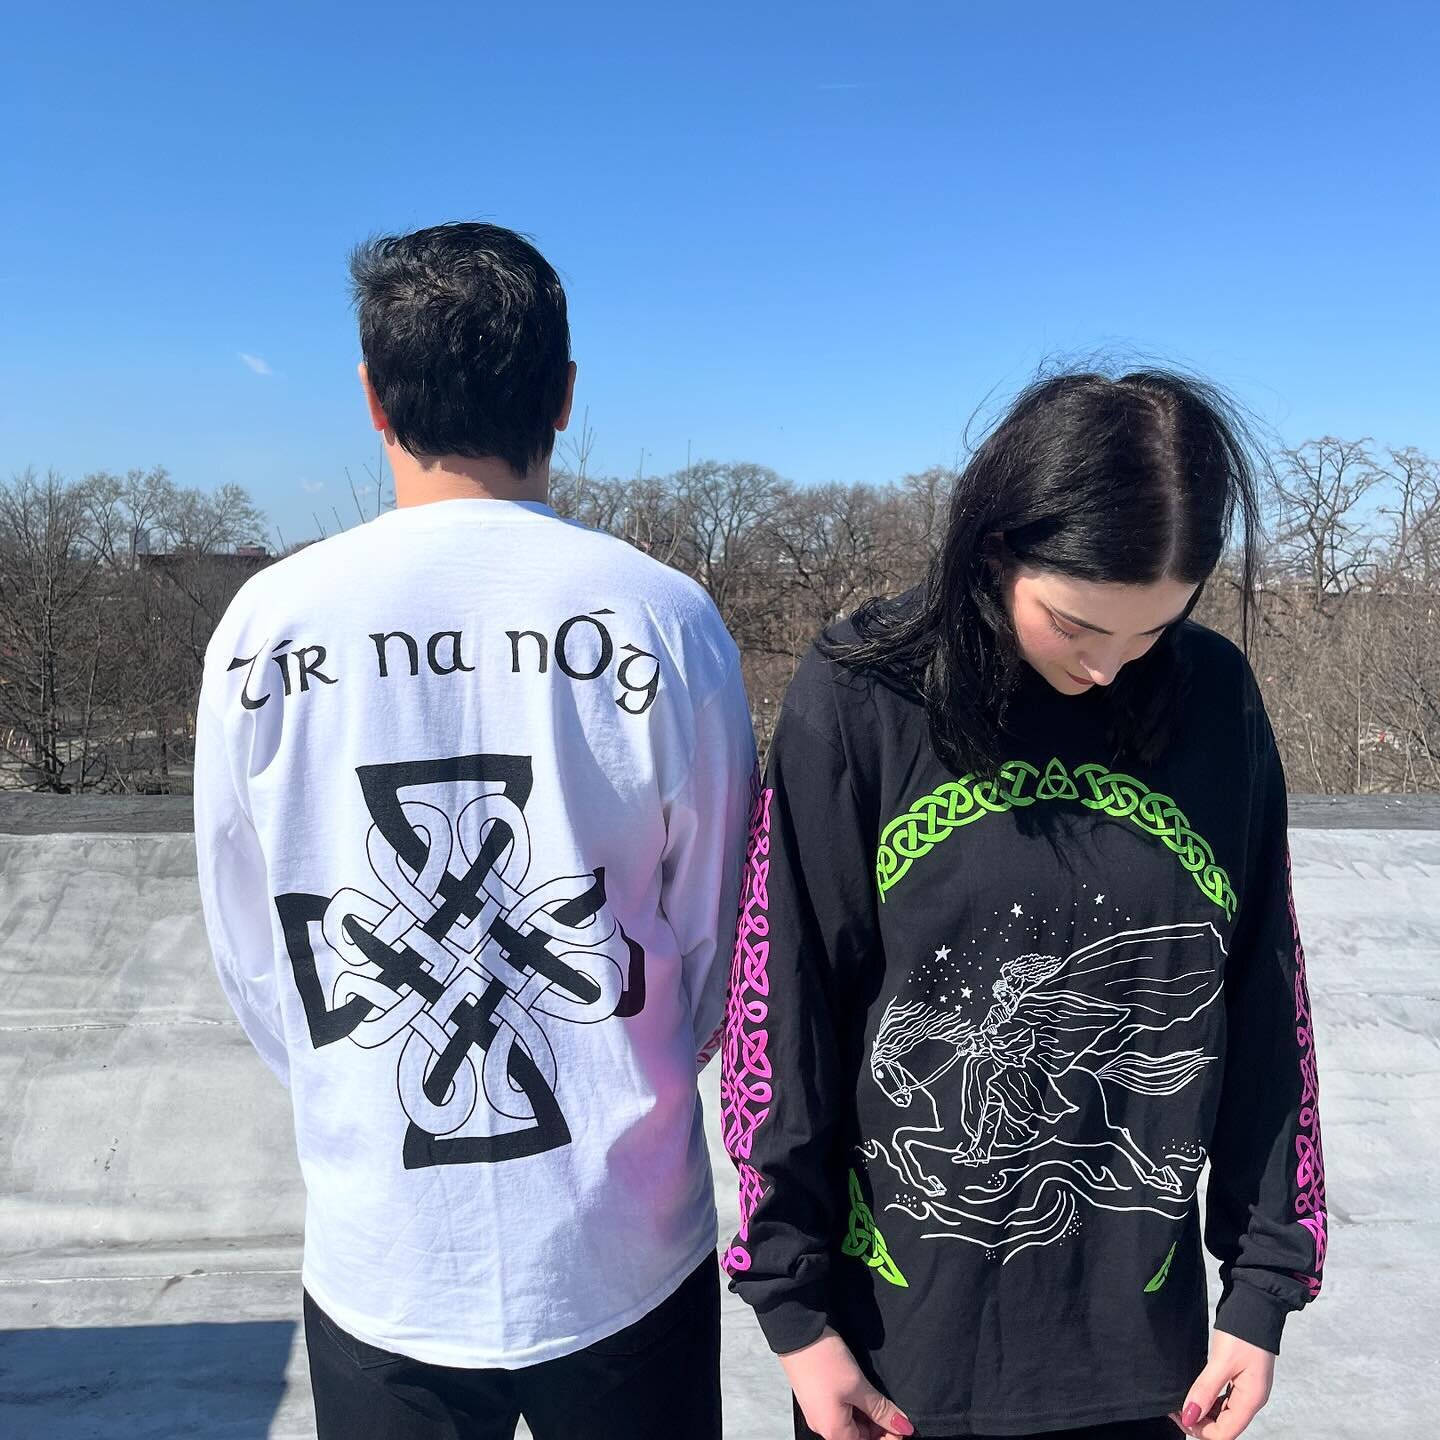 T&iacute;r na n&Oacute;g long sleeves for sale! 🖤🤍🩷💚
$40 each

Just have a small batch of XL currently but will do more in different sizes if yas want them!
3 color screen printed by me. 

This is my favorite Irish story ☘️ 
I&rsquo;ve also been 